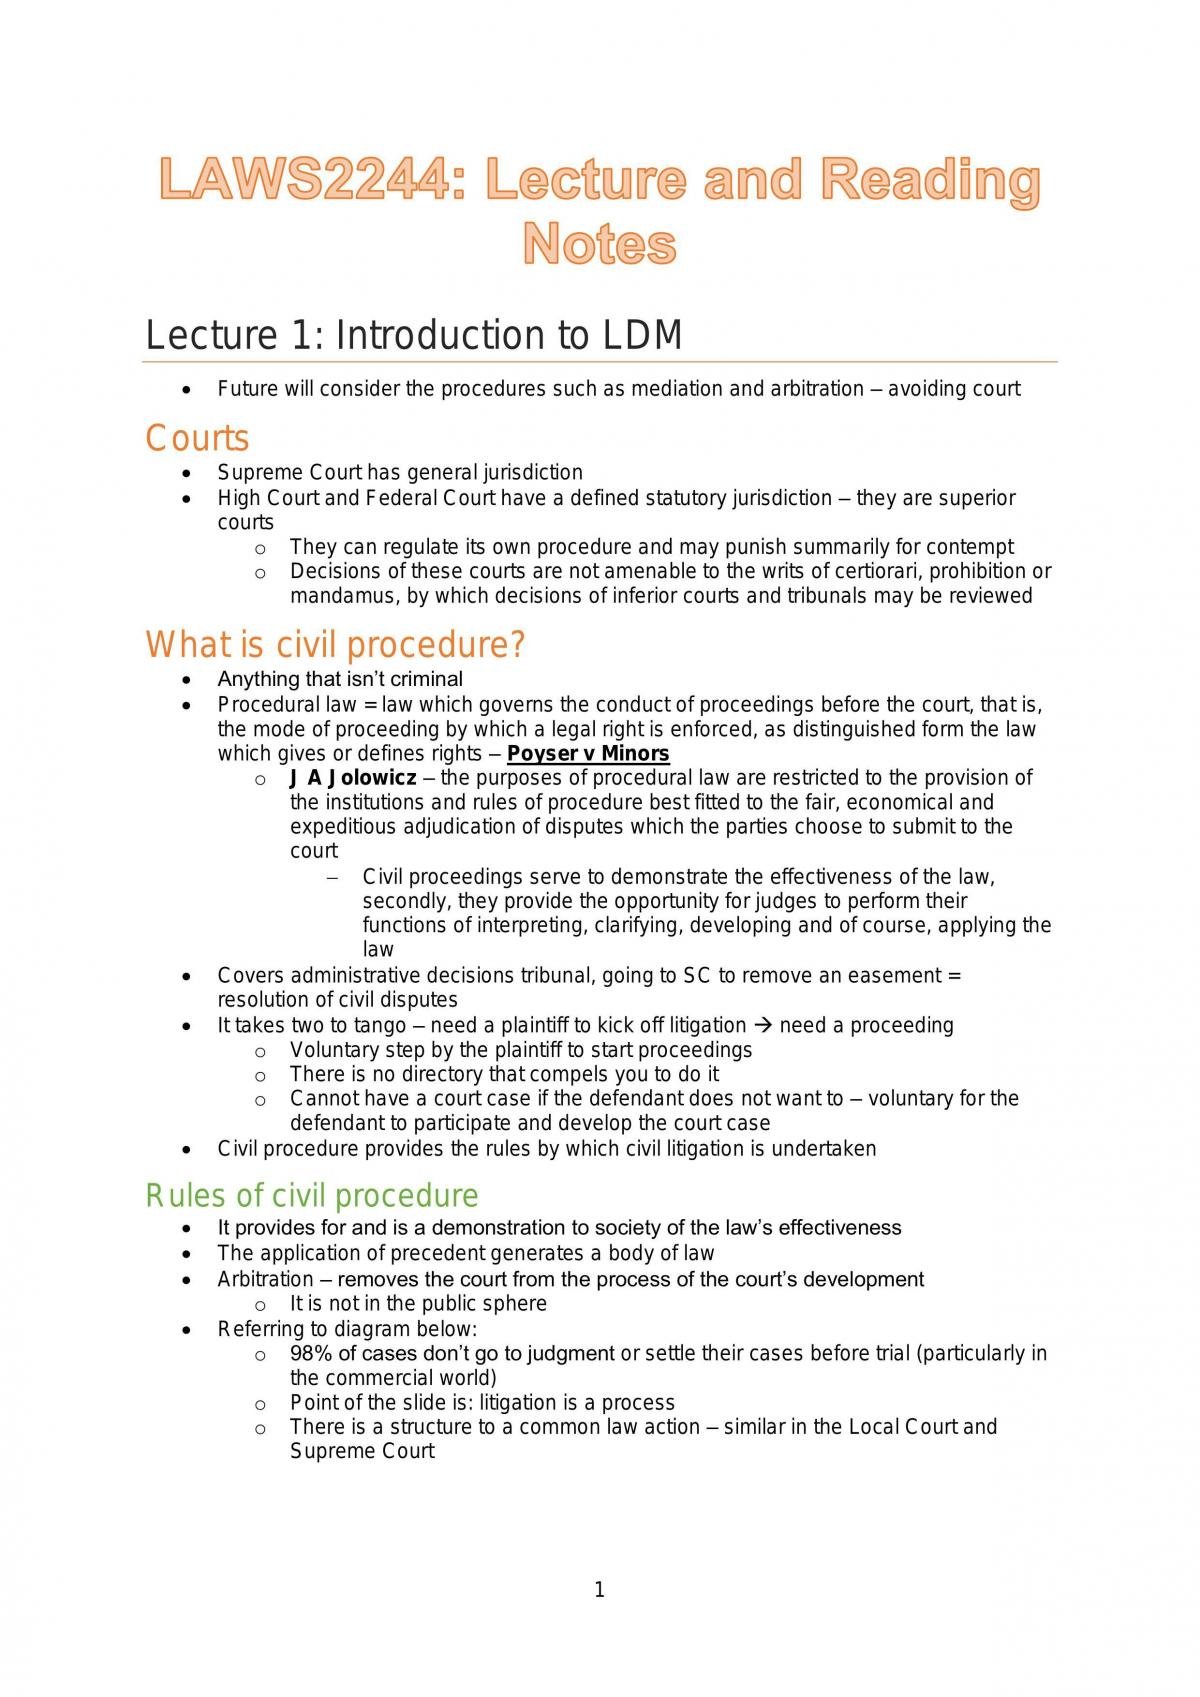 Lecture and reading notes - Page 1